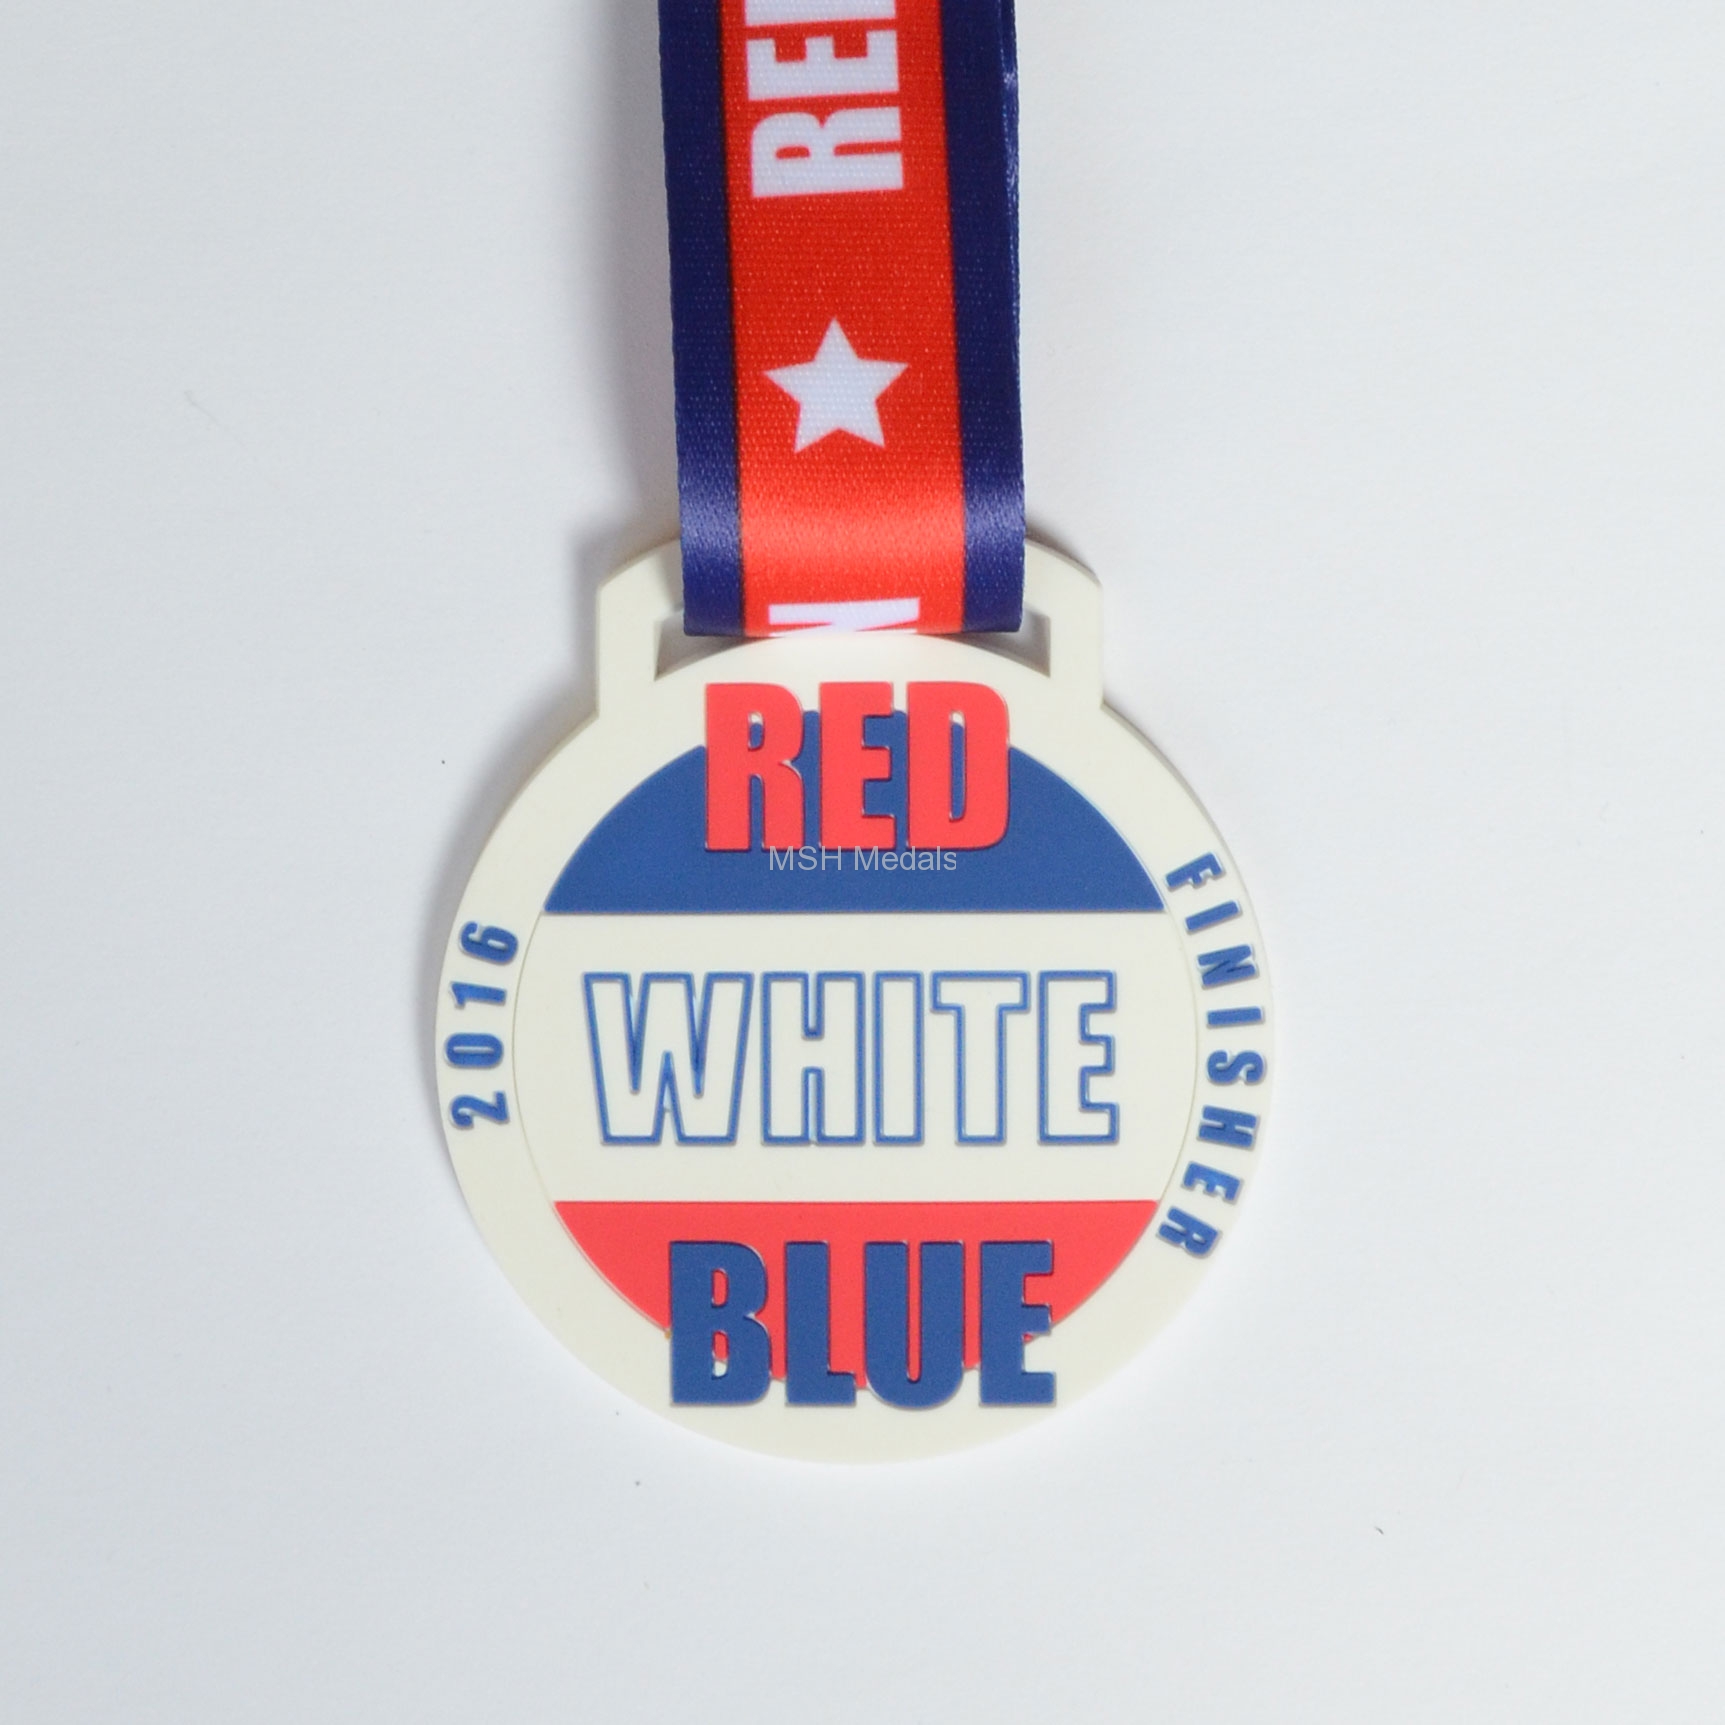 3" silicone medal